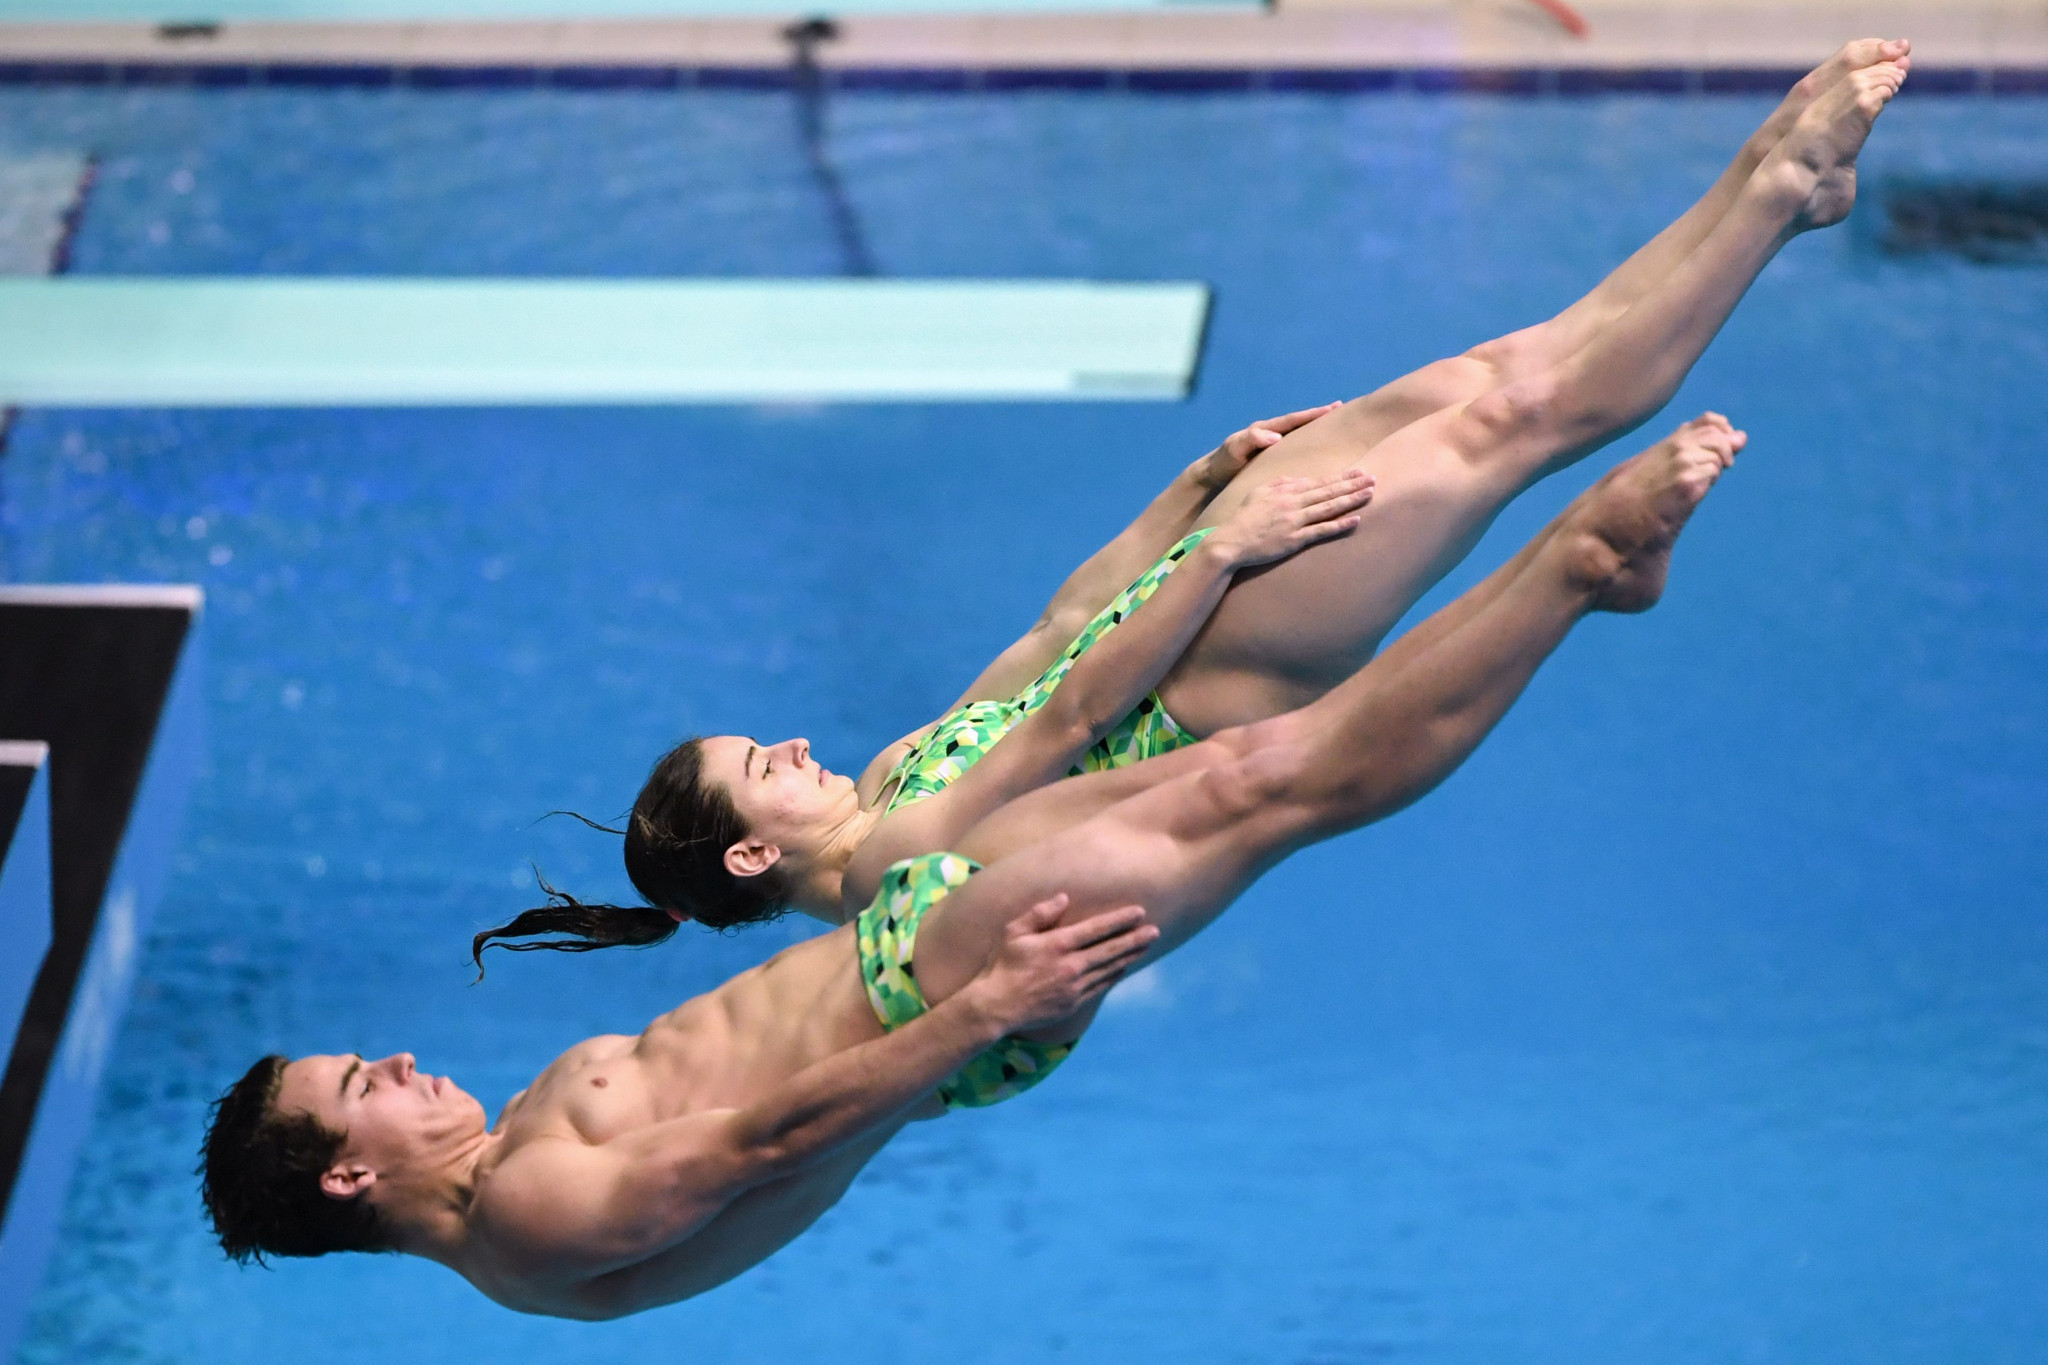 Australian duo Matthew Carter and Maddison Keeney had only been paired together two hours before winning their mixed 3m synchro springboard World Championship title ©Getty Images 